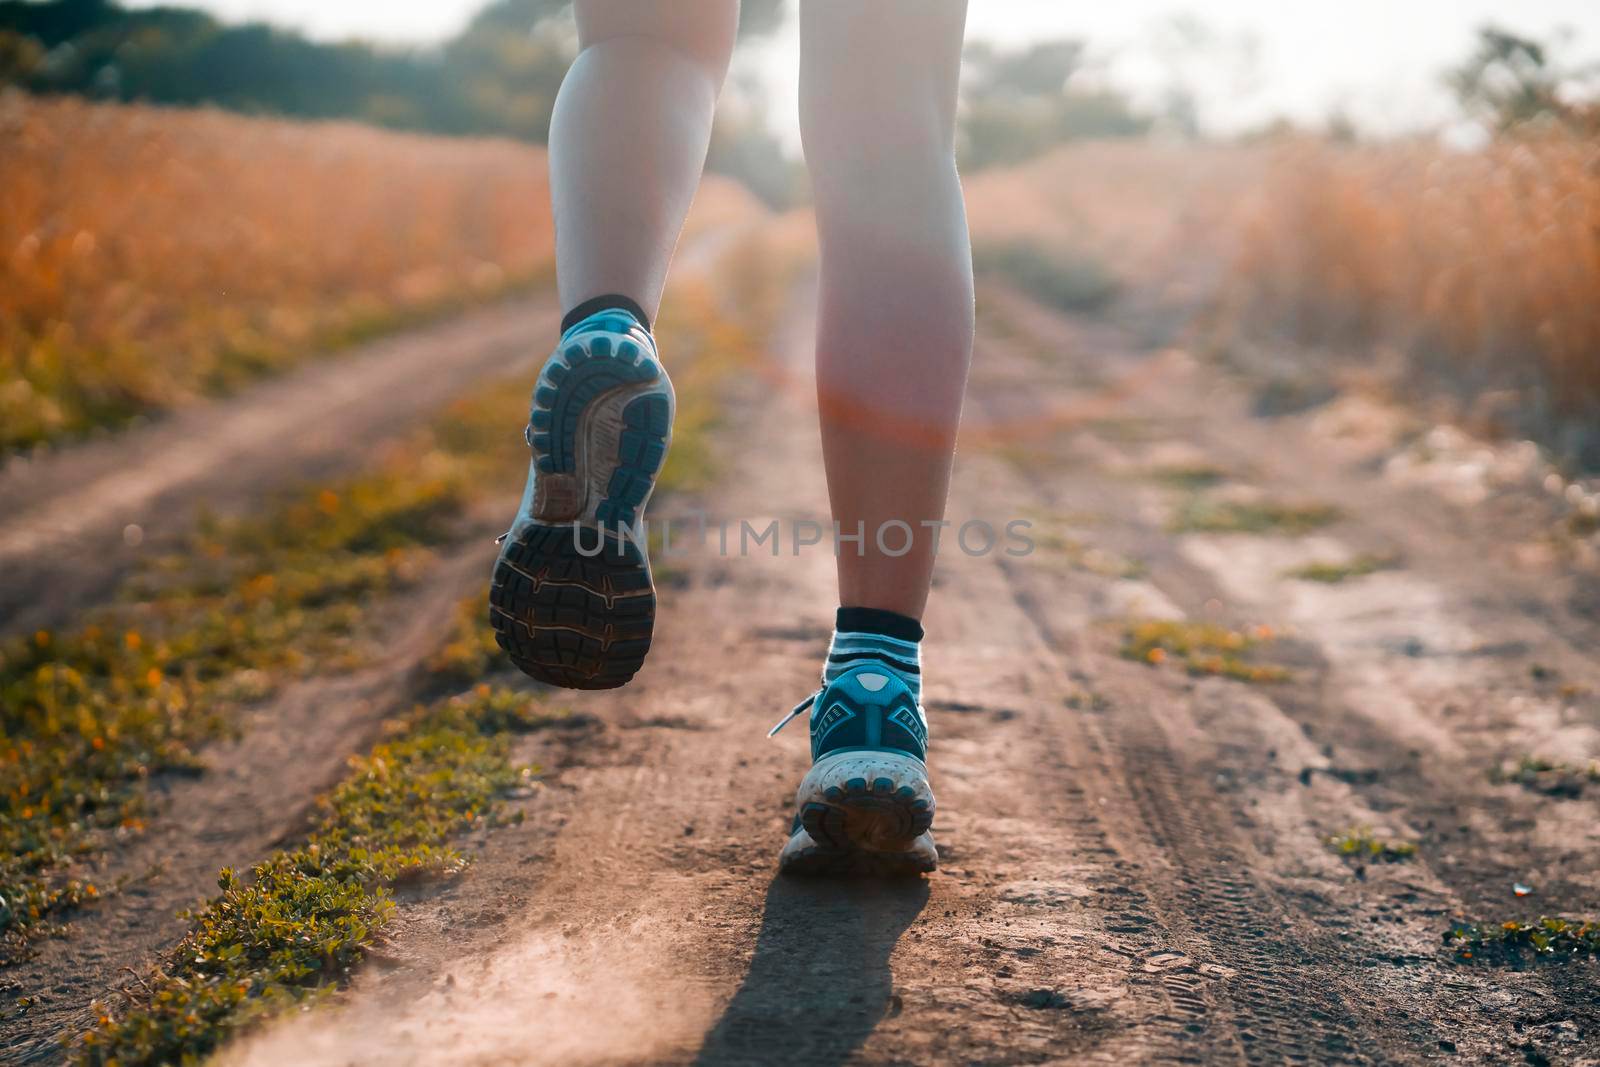 Female athletic legs in sneakers at sunset during outdoor jogging at sunset. A young girl warms up, is engaged in trail running, view on her legs closeup.